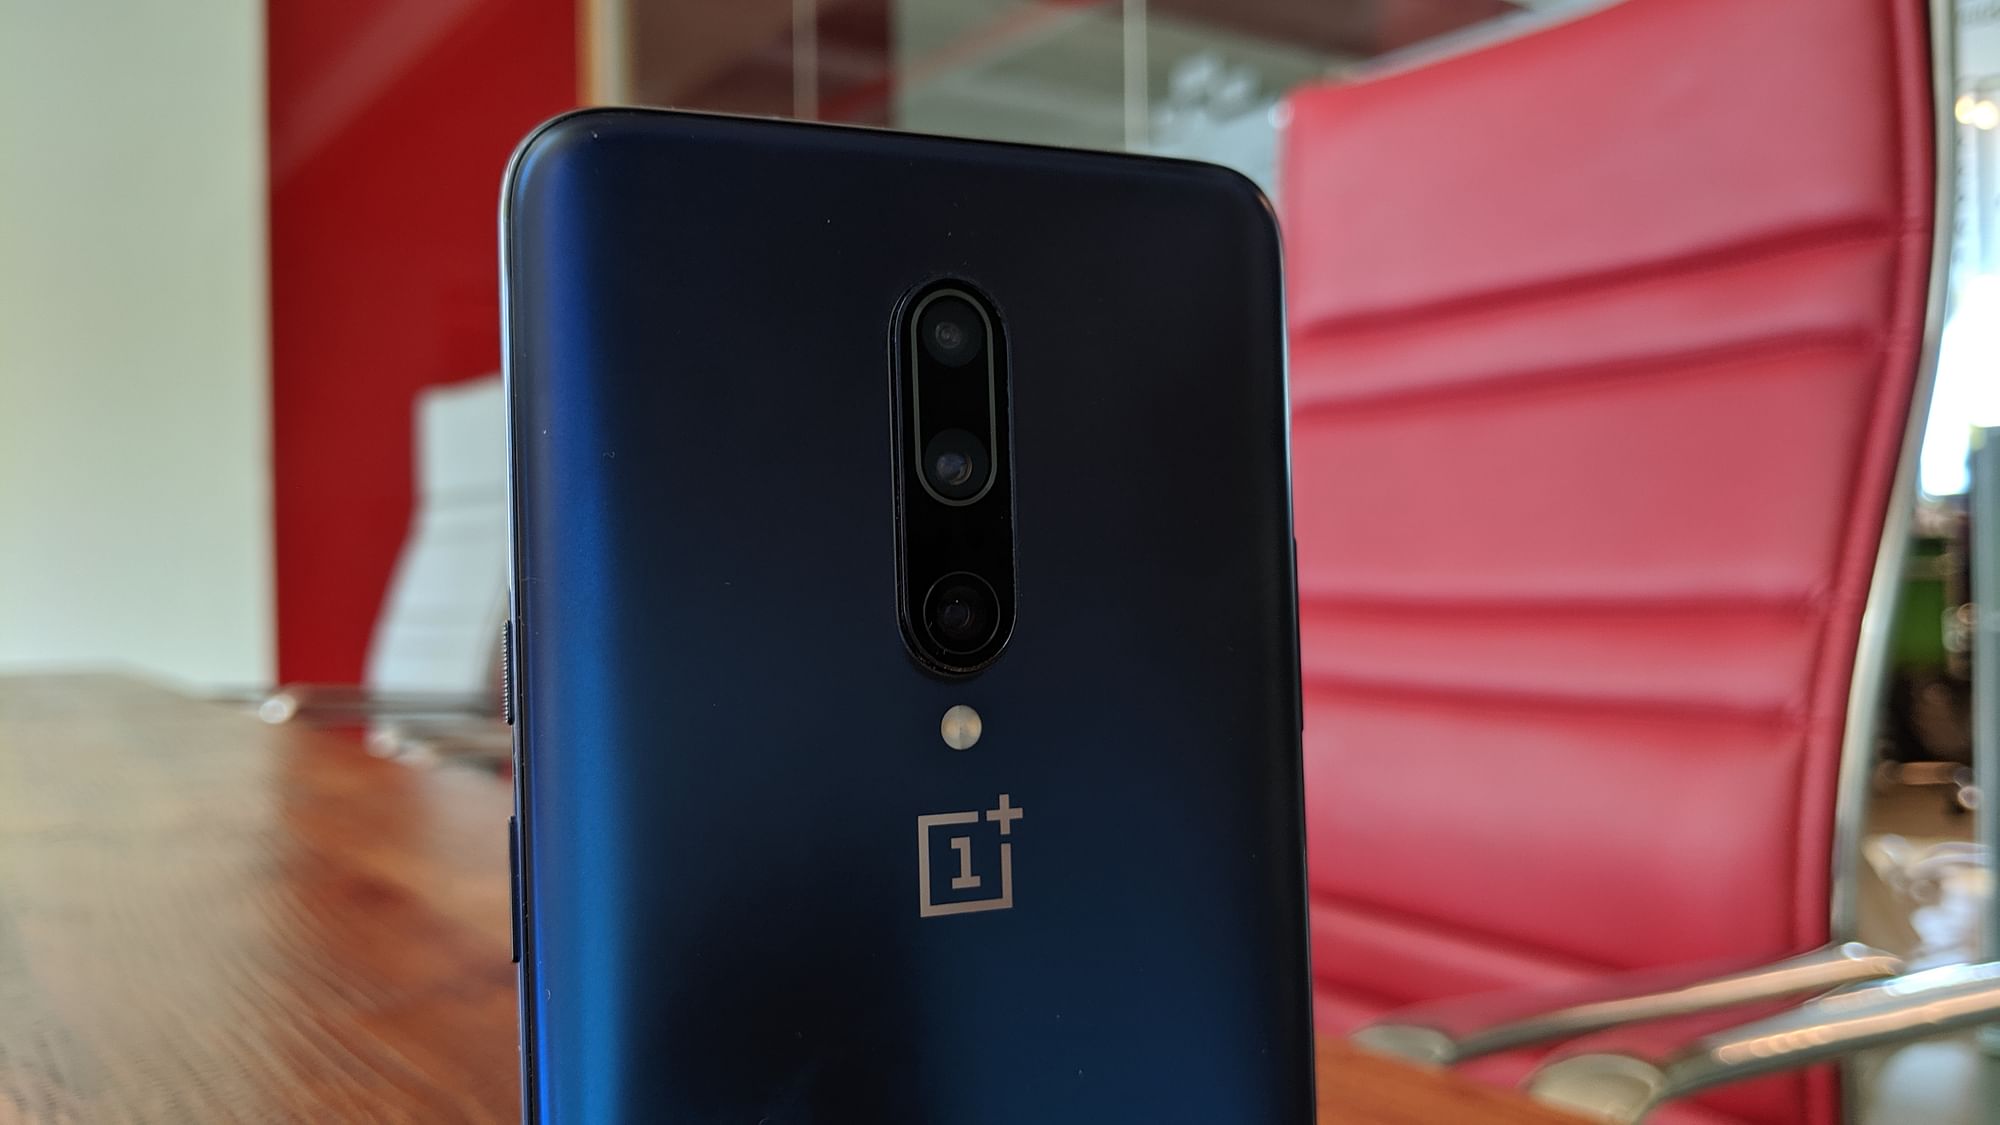 OnePlus made its debut in India back in 2014.